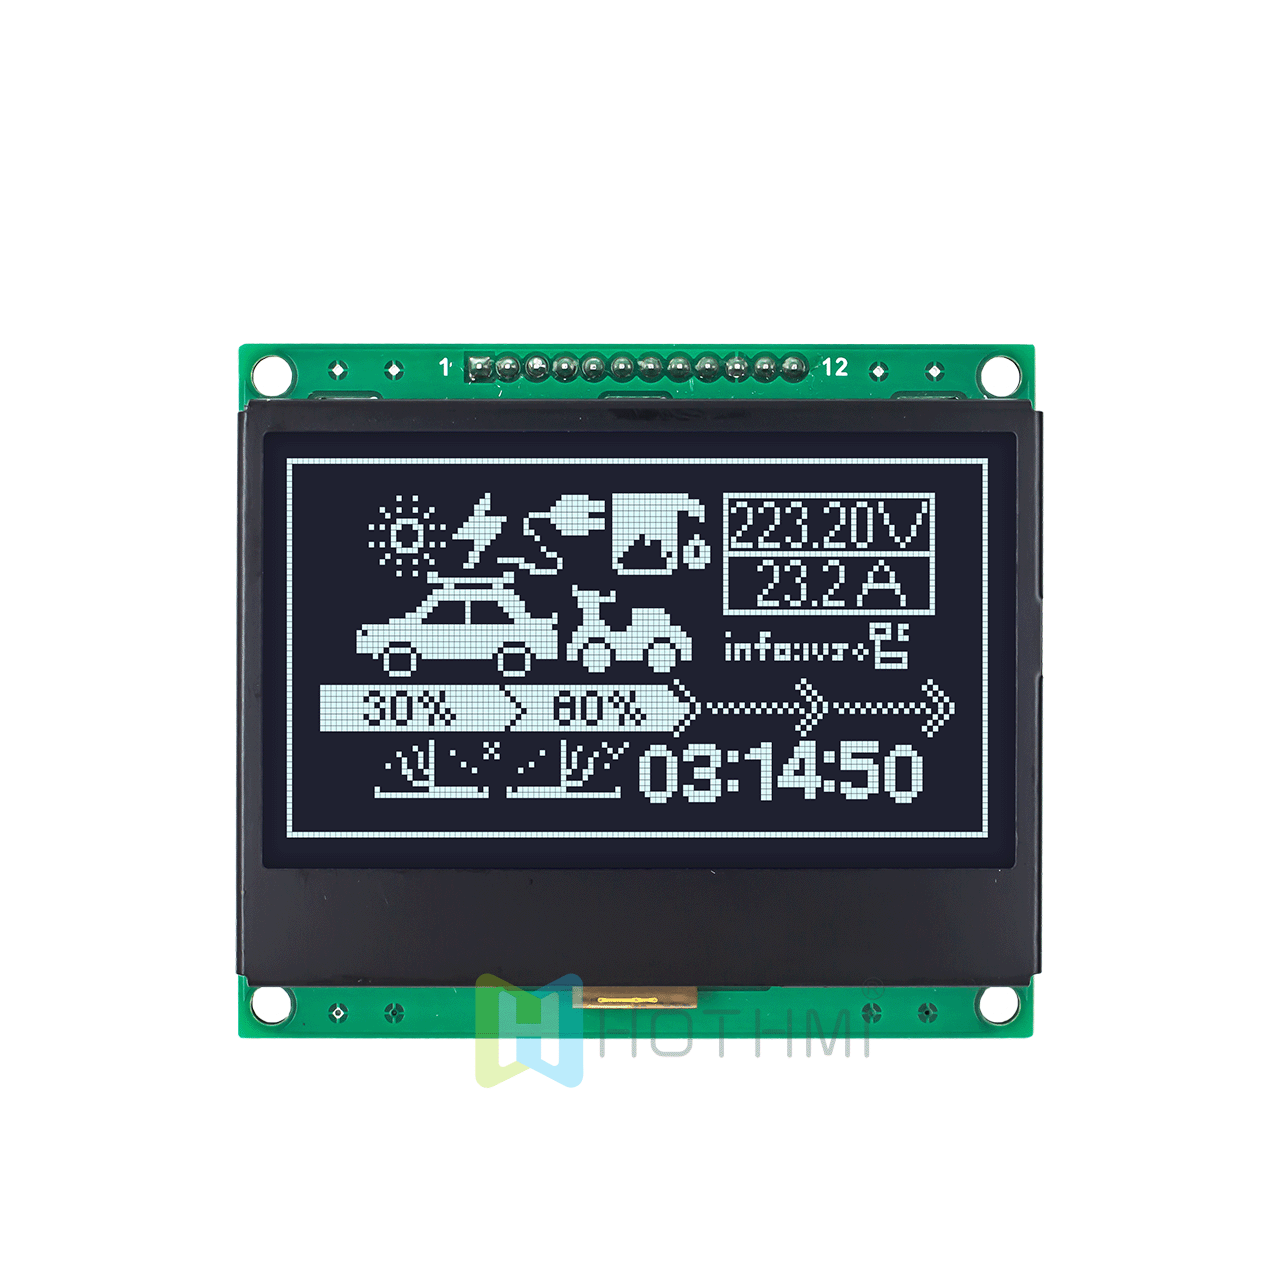 3 Inch 128x64 Graphic LCD Display Module | 128x64 Graphic LCD Module | SPI Interface | White on Black | DFSTN Negative | Adruino